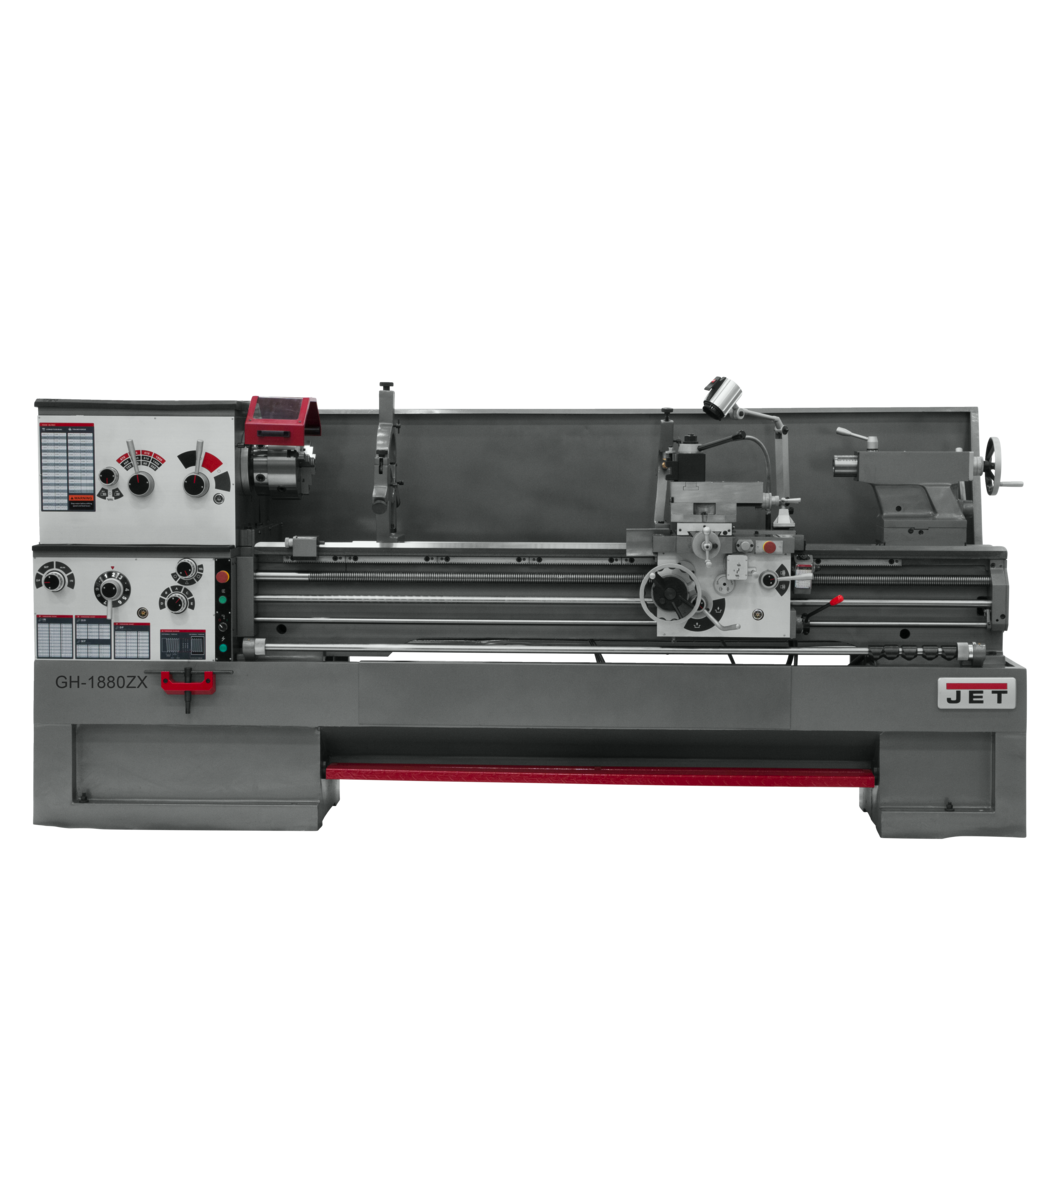 321970, GH-1880ZX, GH-1880ZX, 18" Swing 80" Centers, D1-8 Camlock Spindle, 7-1/2HP, 3Ph, 230/460V, Jet, Metalworking, Turning, Lathes